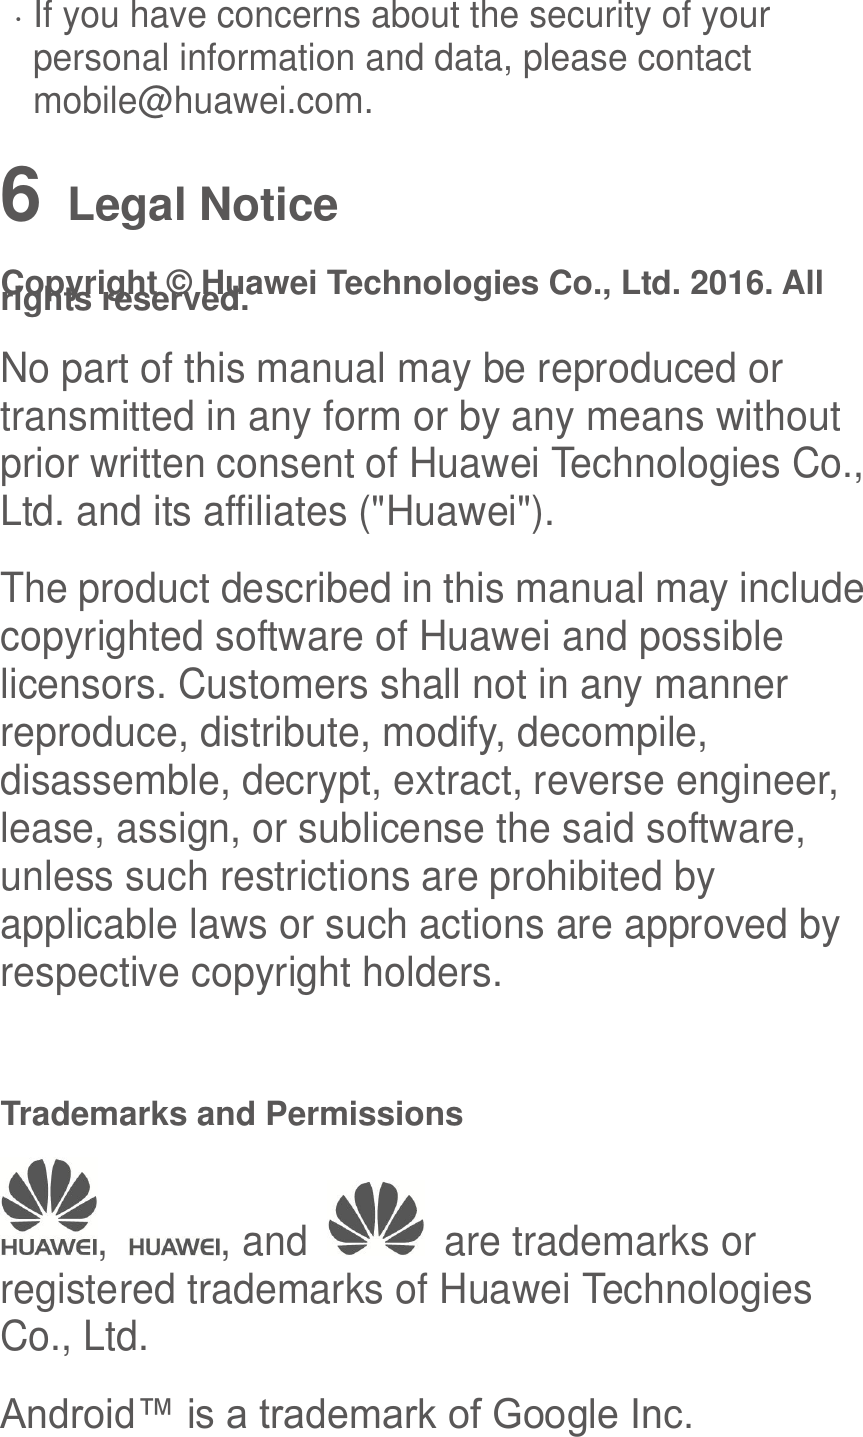   If you have concerns about the security of your personal information and data, please contact mobile@huawei.com. 6   Legal Notice Copyright © Huawei Technologies Co., Ltd. 2016. All rights reserved. No part of this manual may be reproduced or transmitted in any form or by any means without prior written consent of Huawei Technologies Co., Ltd. and its affiliates (&quot;Huawei&quot;). The product described in this manual may include copyrighted software of Huawei and possible licensors. Customers shall not in any manner reproduce, distribute, modify, decompile, disassemble, decrypt, extract, reverse engineer, lease, assign, or sublicense the said software, unless such restrictions are prohibited by applicable laws or such actions are approved by respective copyright holders.  Trademarks and Permissions ,  , and    are trademarks or registered trademarks of Huawei Technologies Co., Ltd. Android™ is a trademark of Google Inc. 